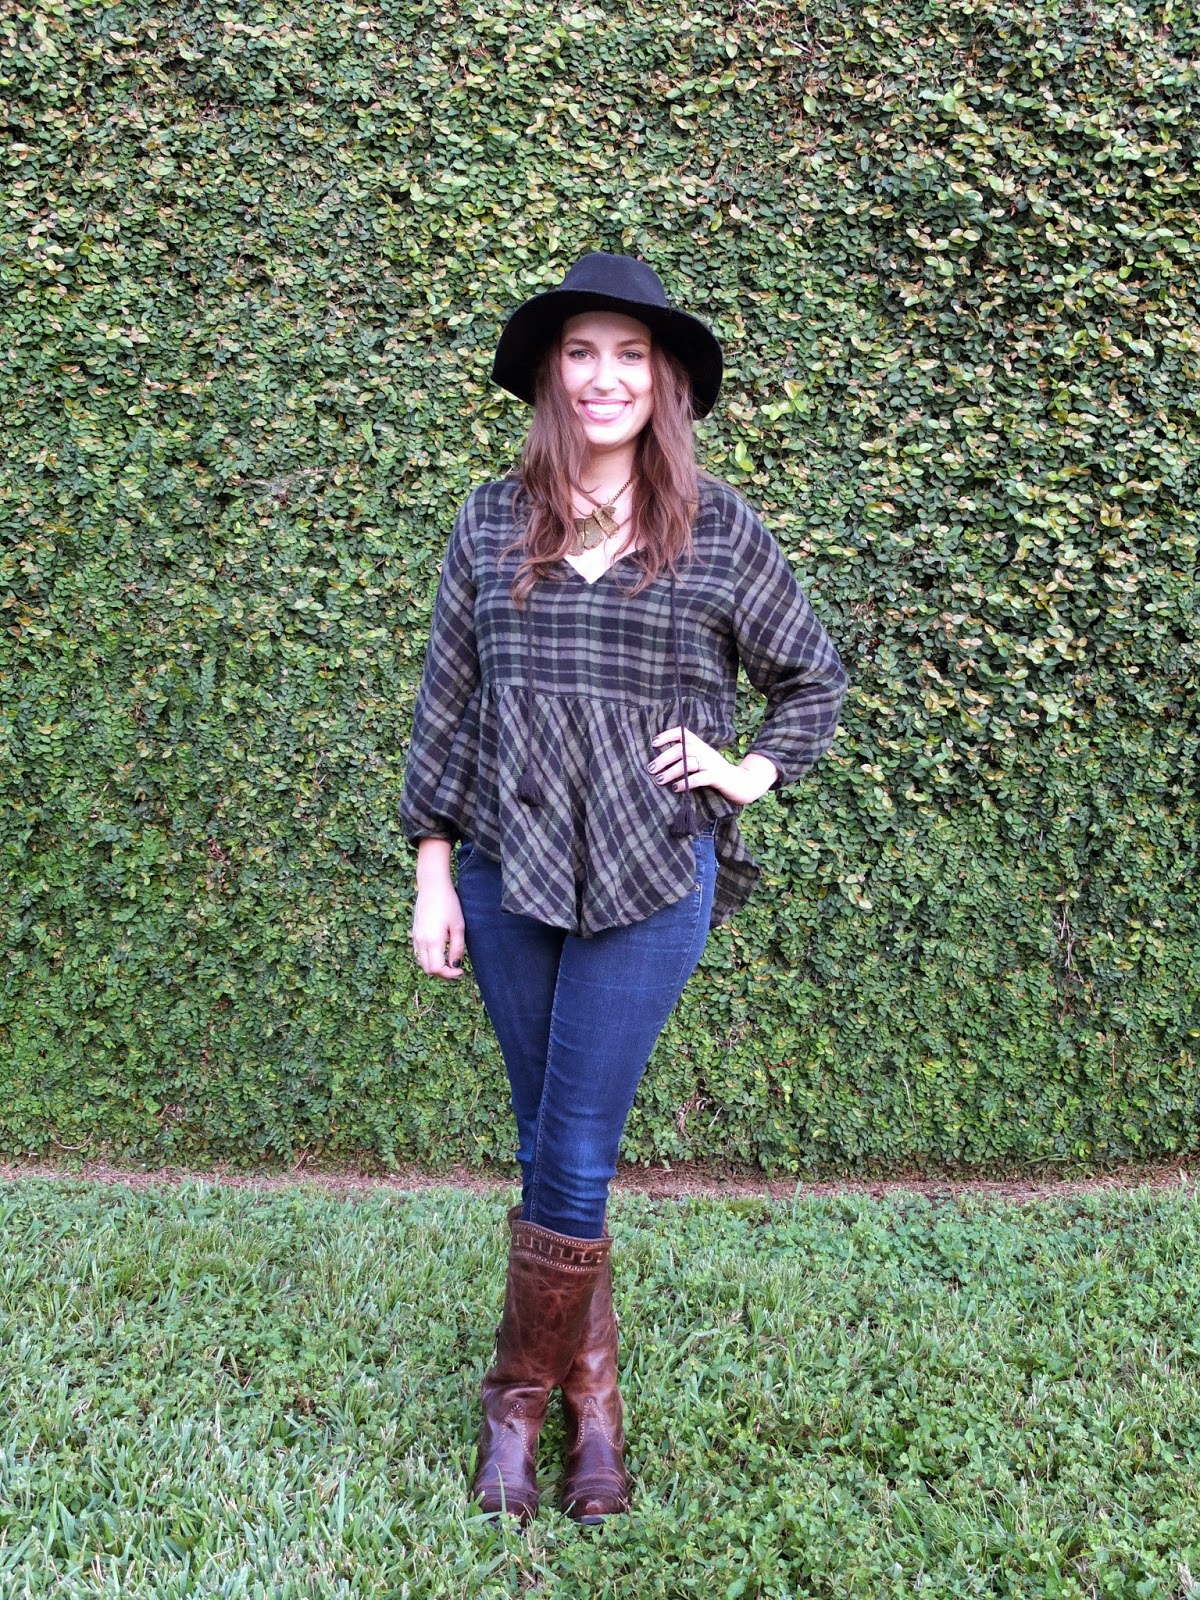 Anthropologie Plaid Peasant Top, Anthropologie Green Top, Anthropologie Green Plaid Top, Trendy in Texas, Fall Fashion, Trendy in Texas Fall Style, Black Floppy Felt Hat, Black Floppy Hat, Ariat Boots, Western Boots, Cavender's, Ariat Cavander's Boots, Houston Cowboy Boots, Ariat Sahara Boots